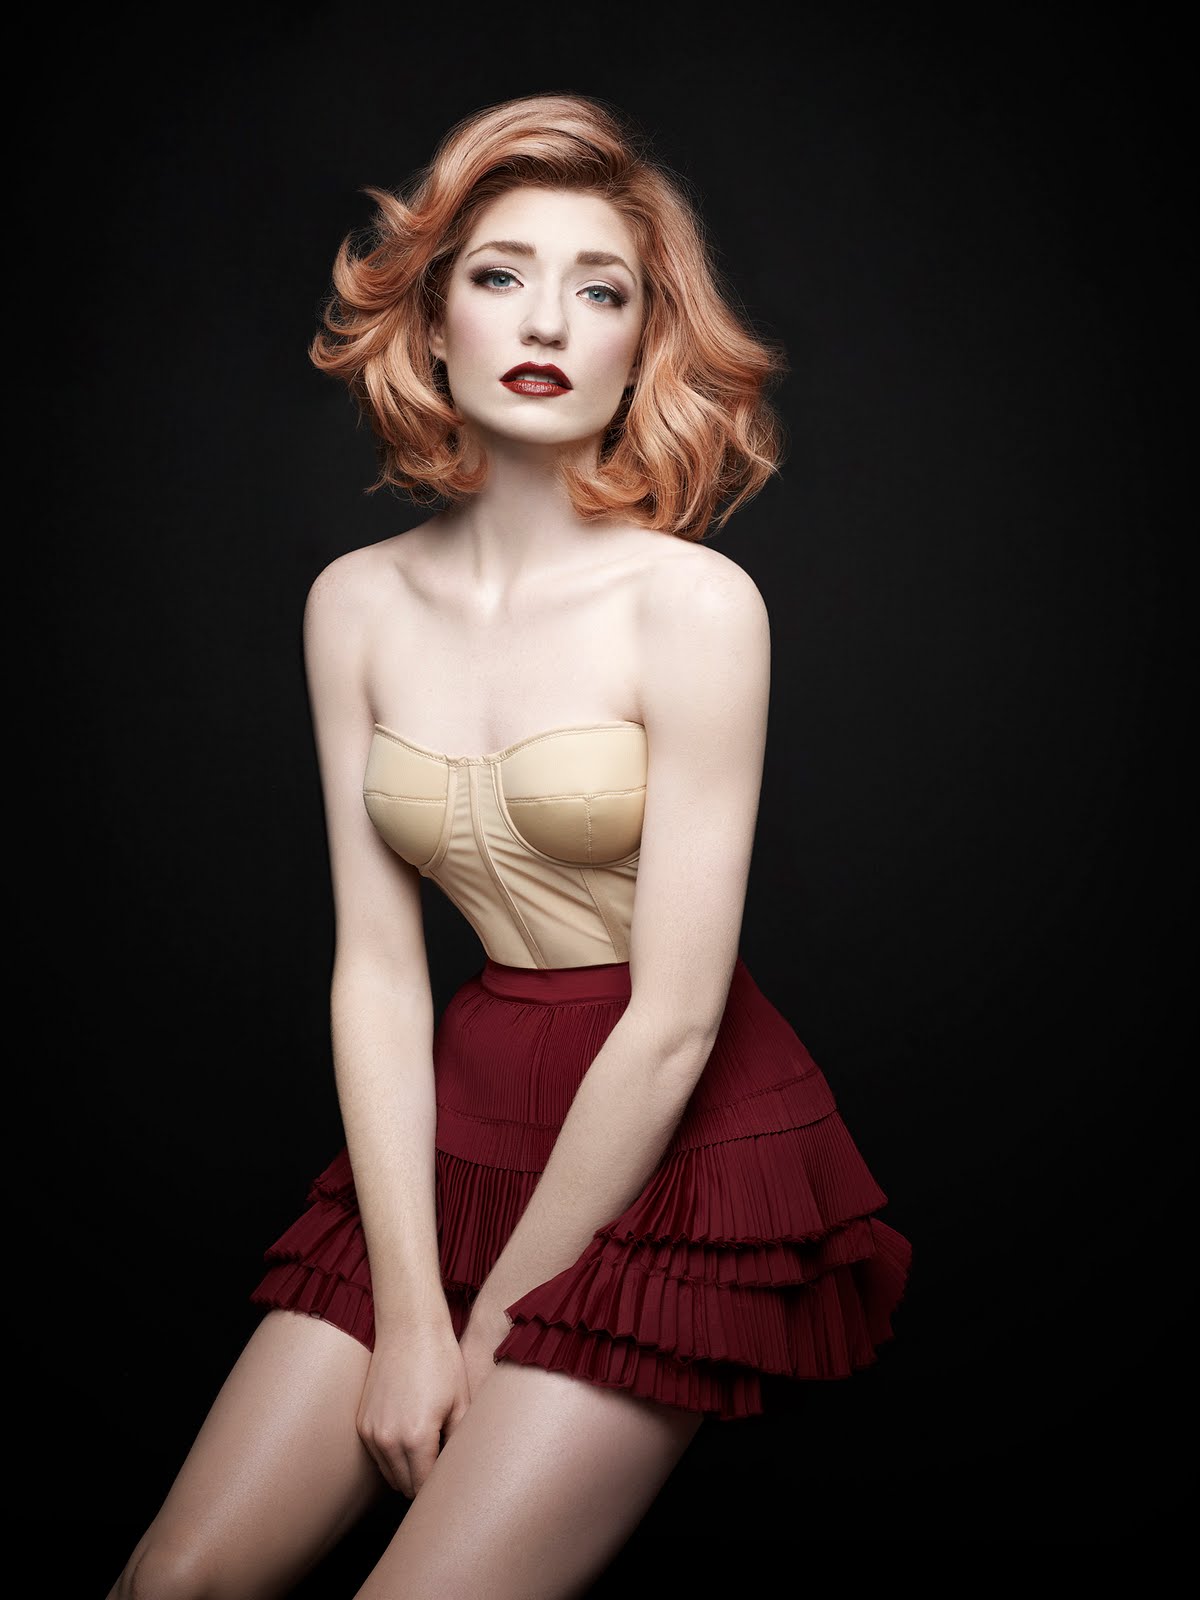 Nicola Roberts Backgrounds, Compatible - PC, Mobile, Gadgets| 1200x1600 px